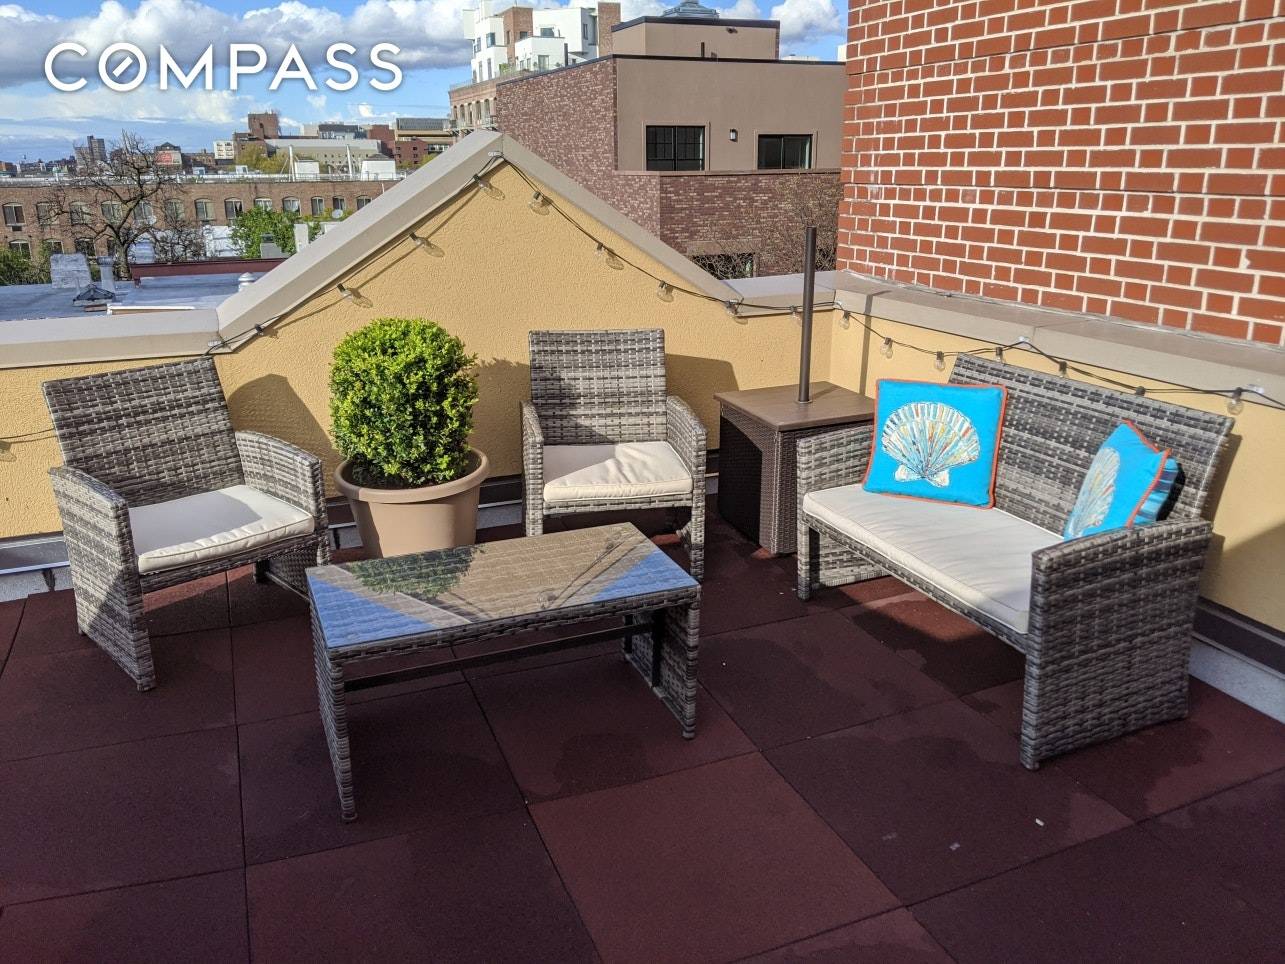 Sun blasted, mint condition, top floor duplex one bedroom plus loft with PRIVATE ROOF TERRACE located just off of 7th avenue in Park Slope.